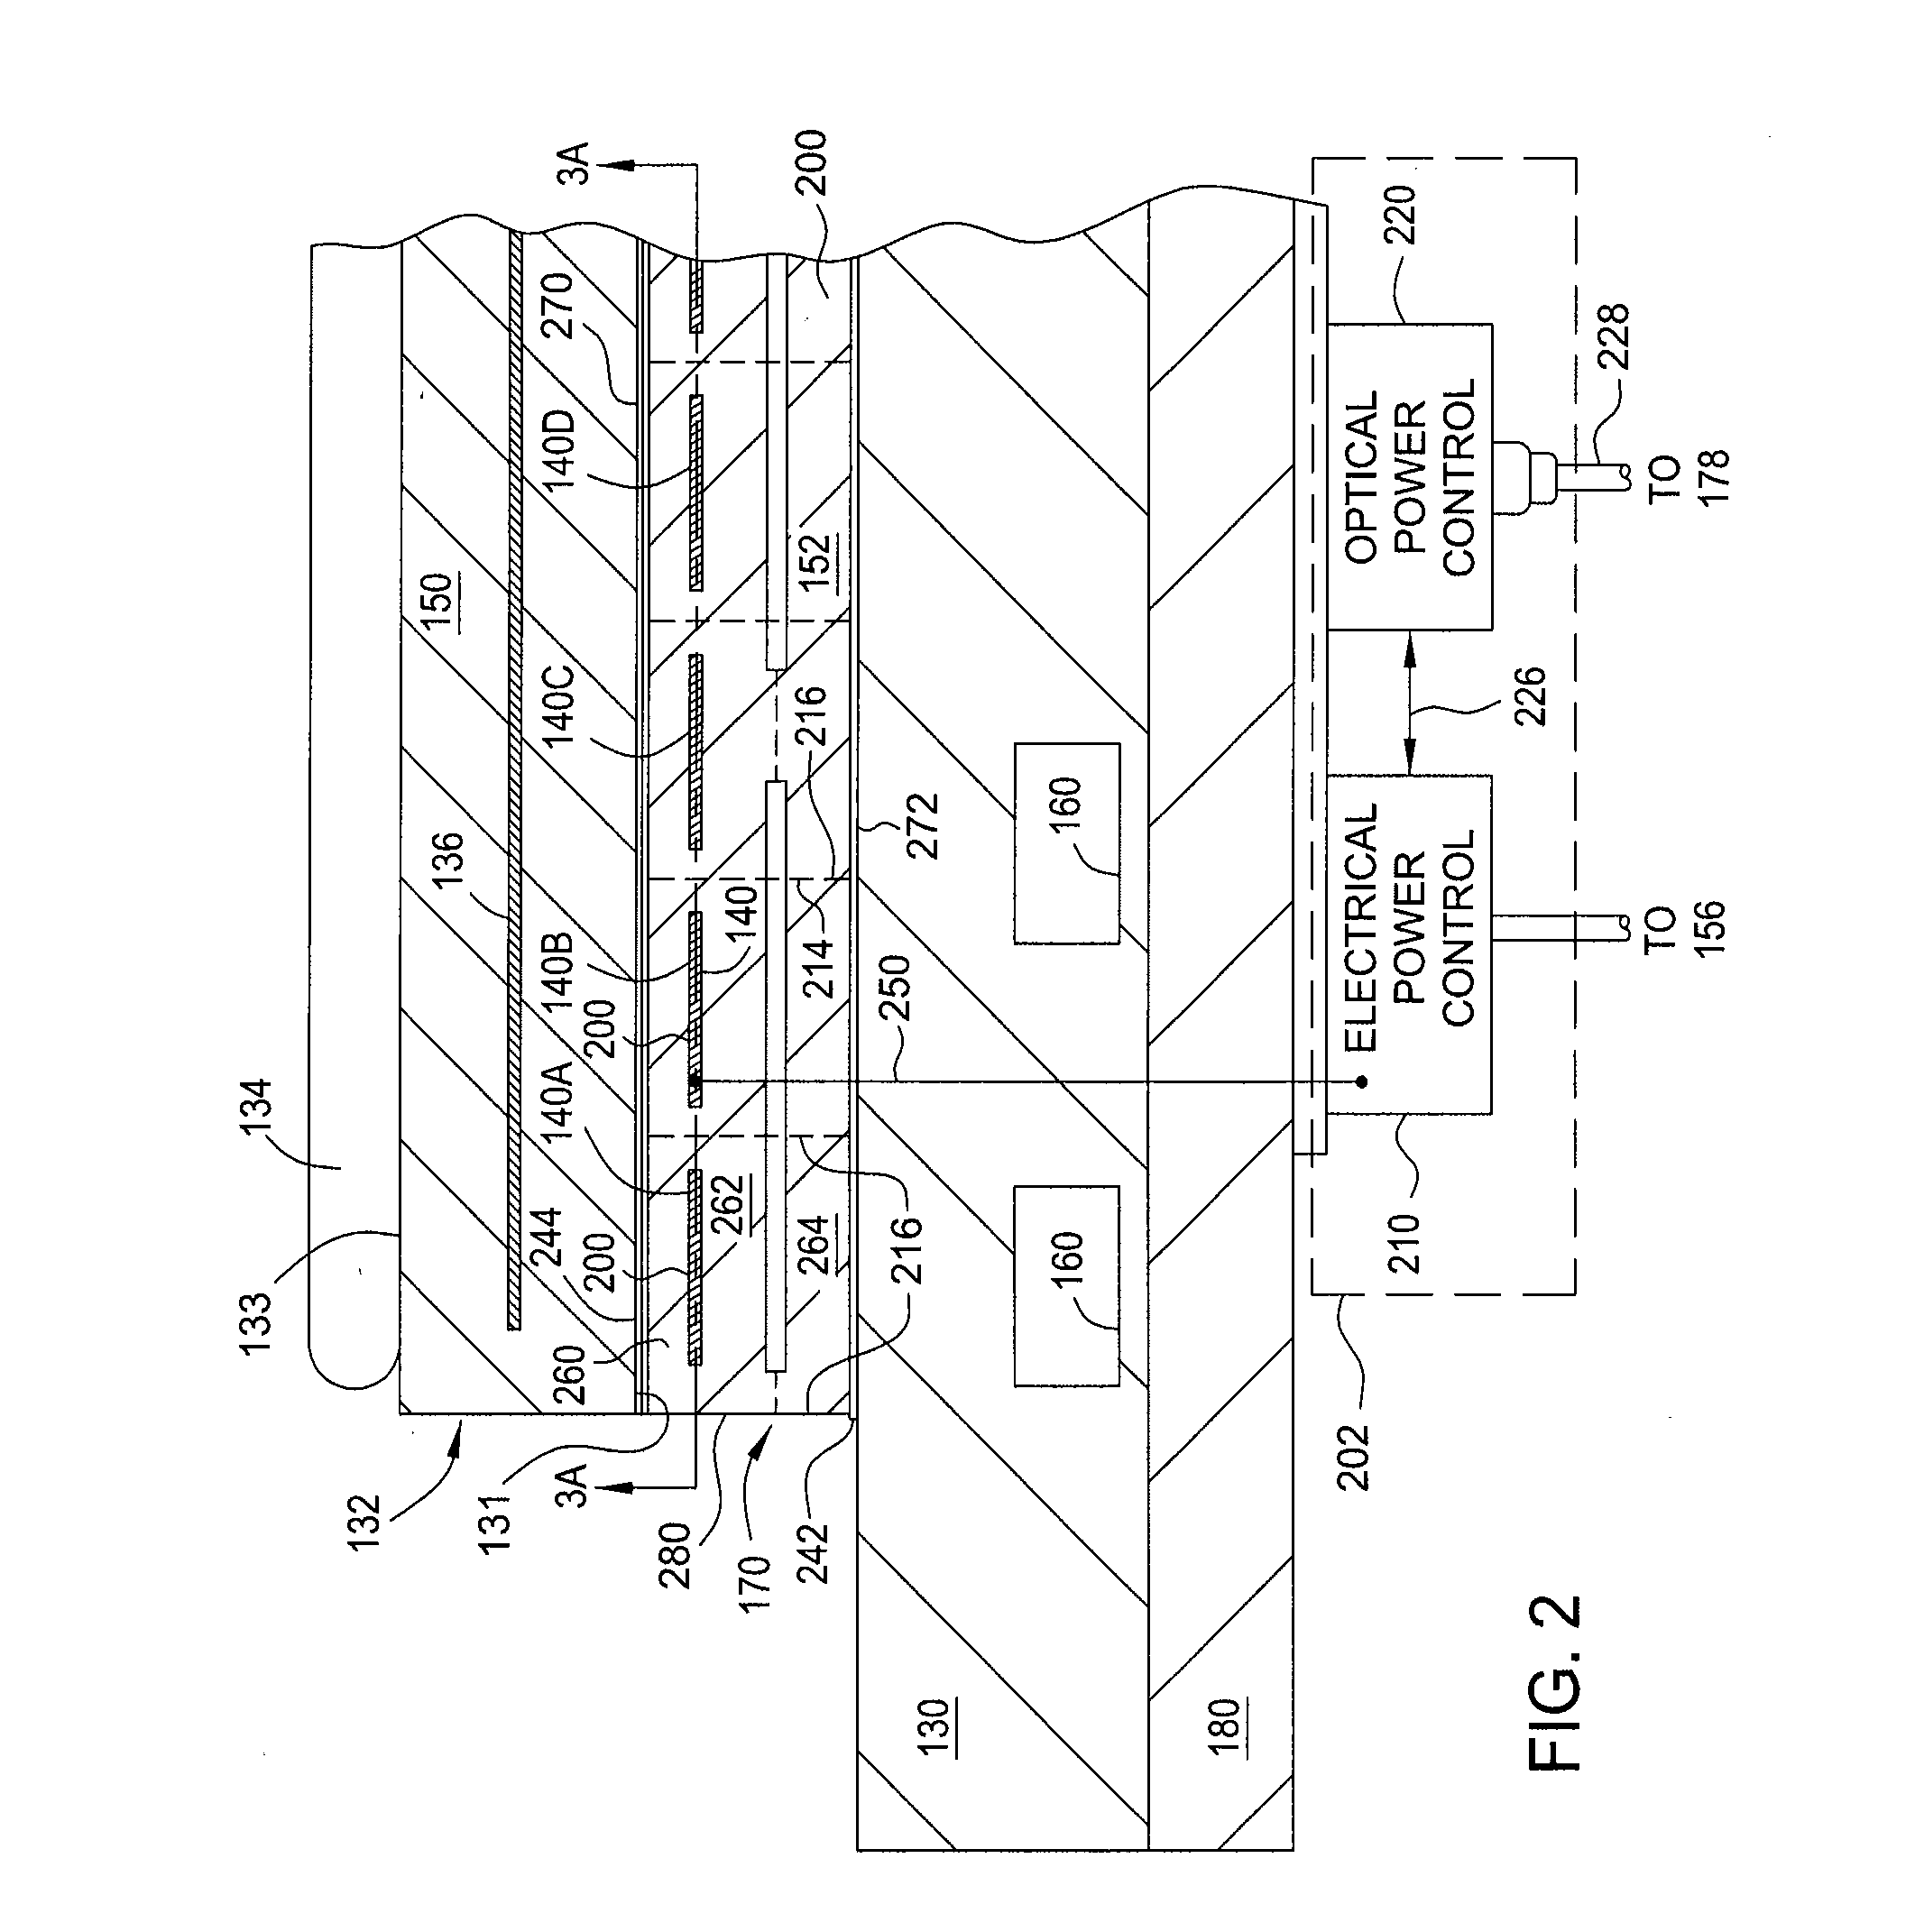 Tunable temperature controlled substrate support assembly